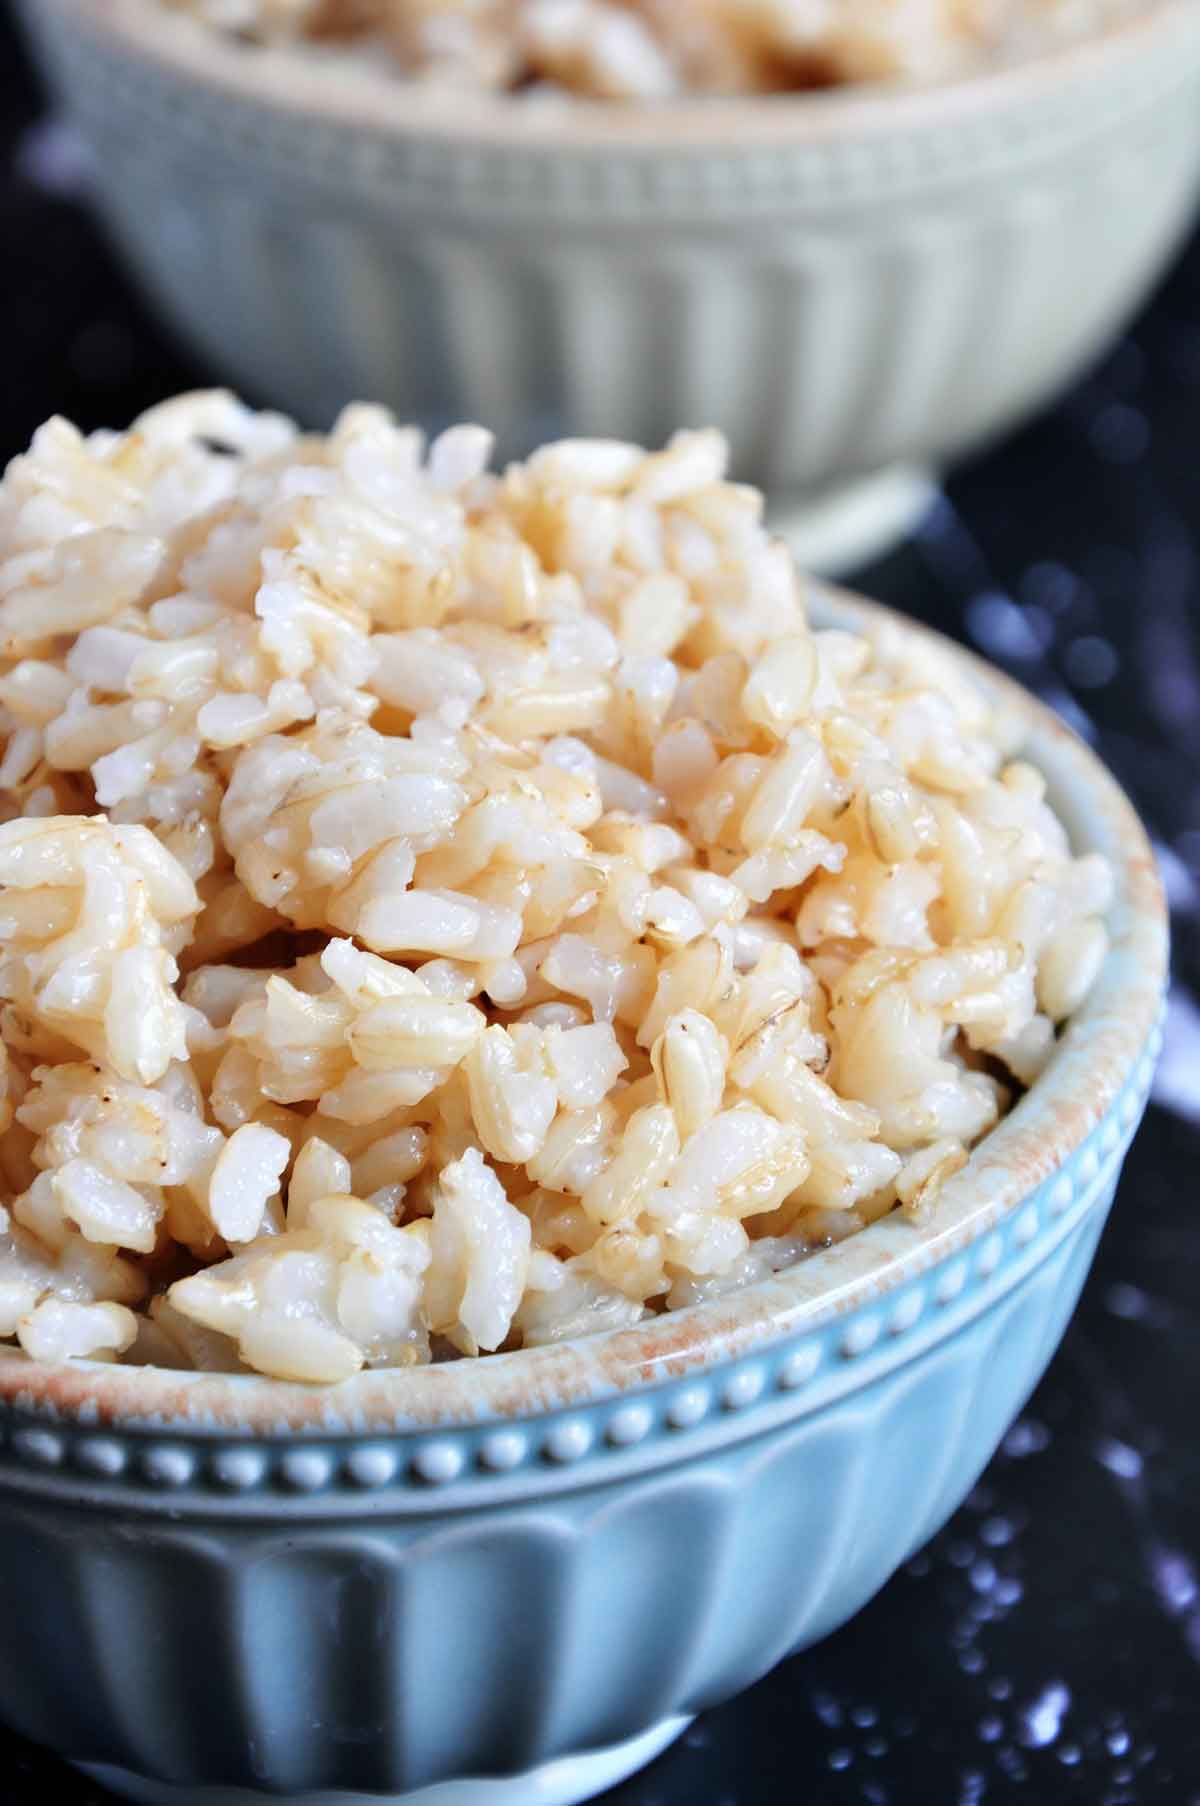 Cooked Brown rice in a bowl.